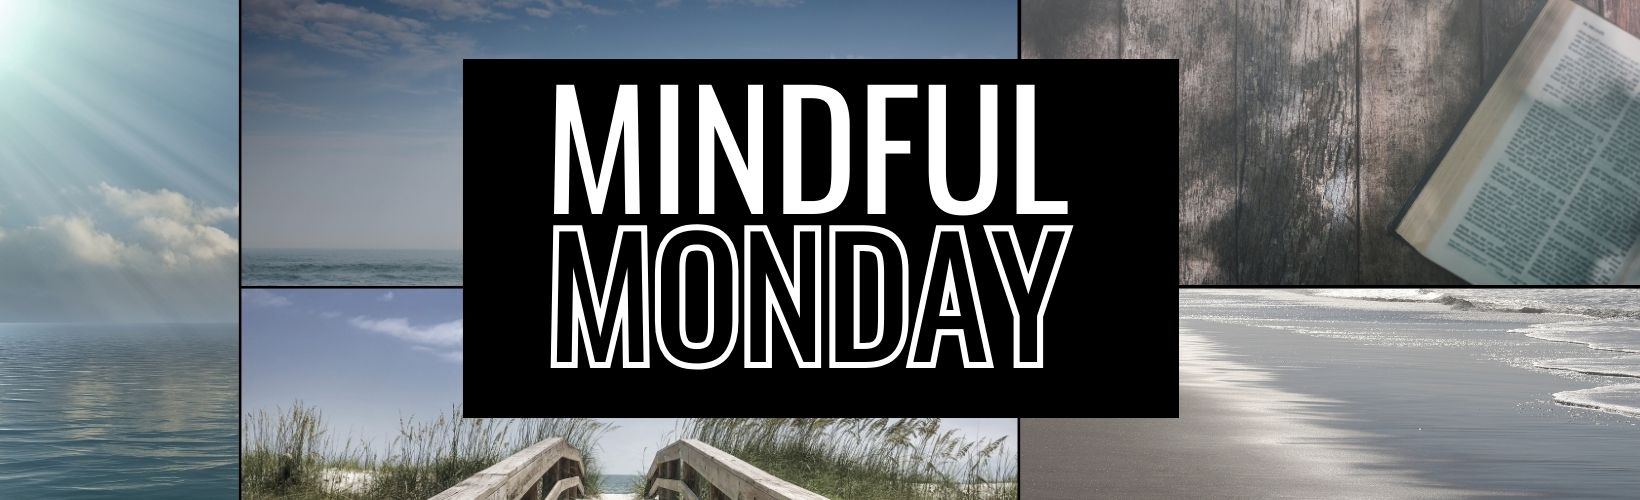 Mindful Monday: How to Inspire Your Mindfulness Practice with Quotes